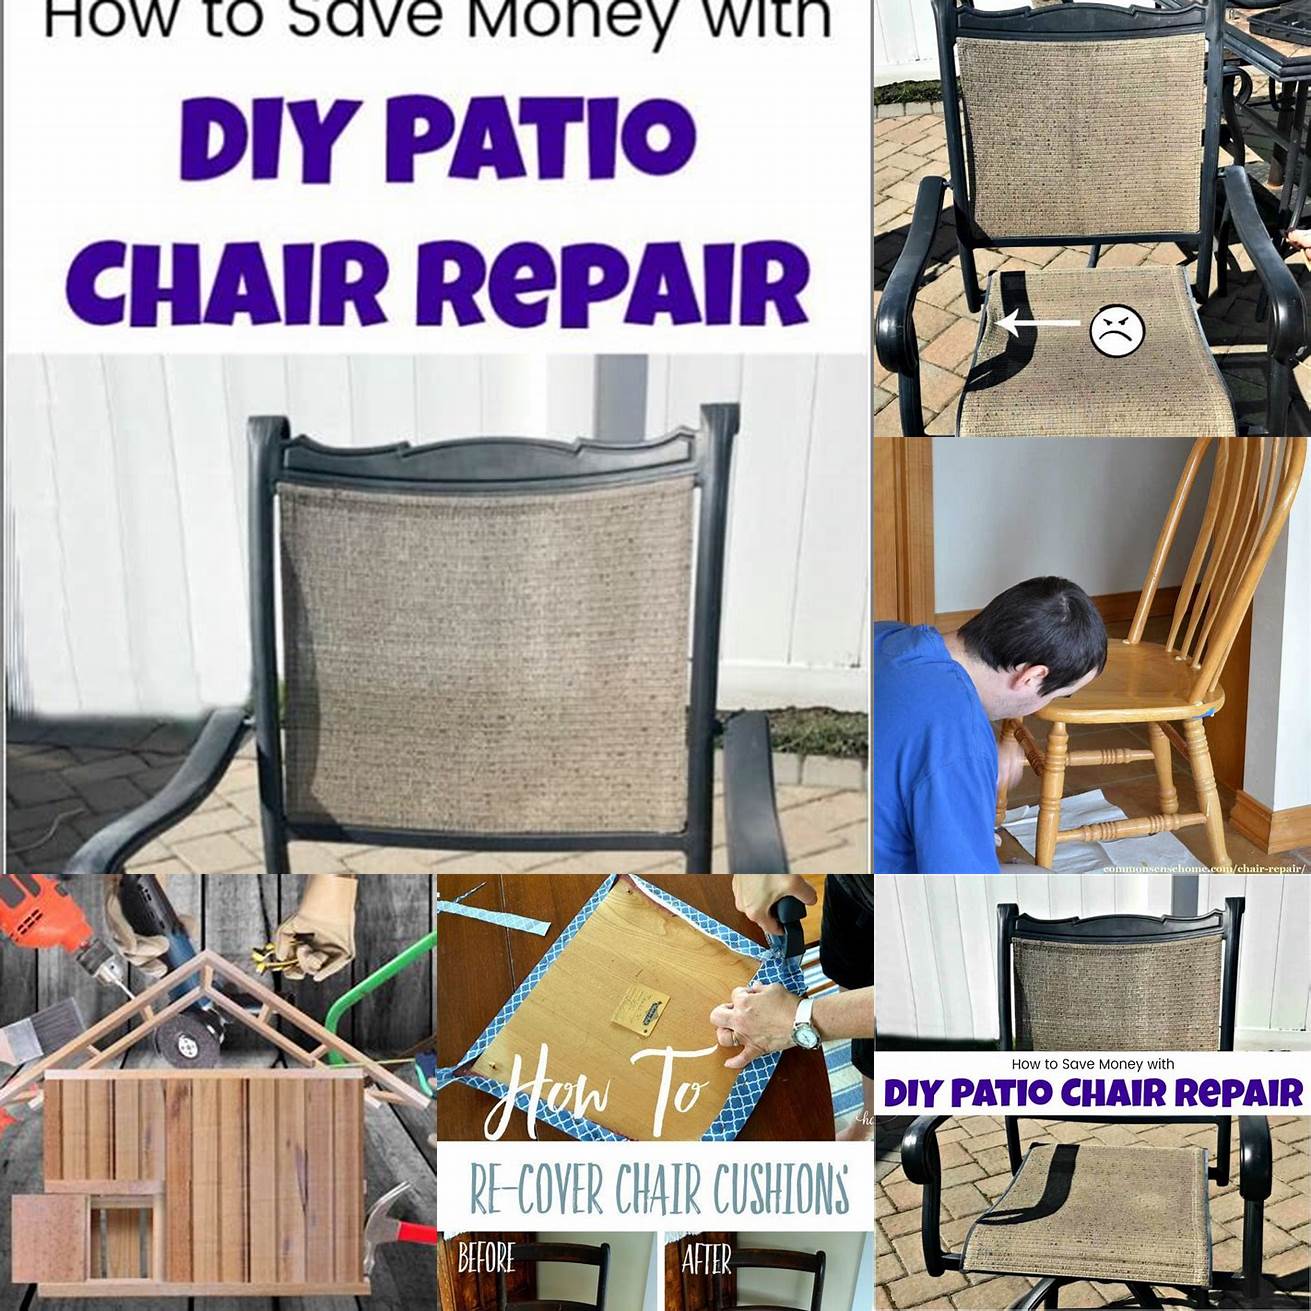 May require more maintenance than chairs